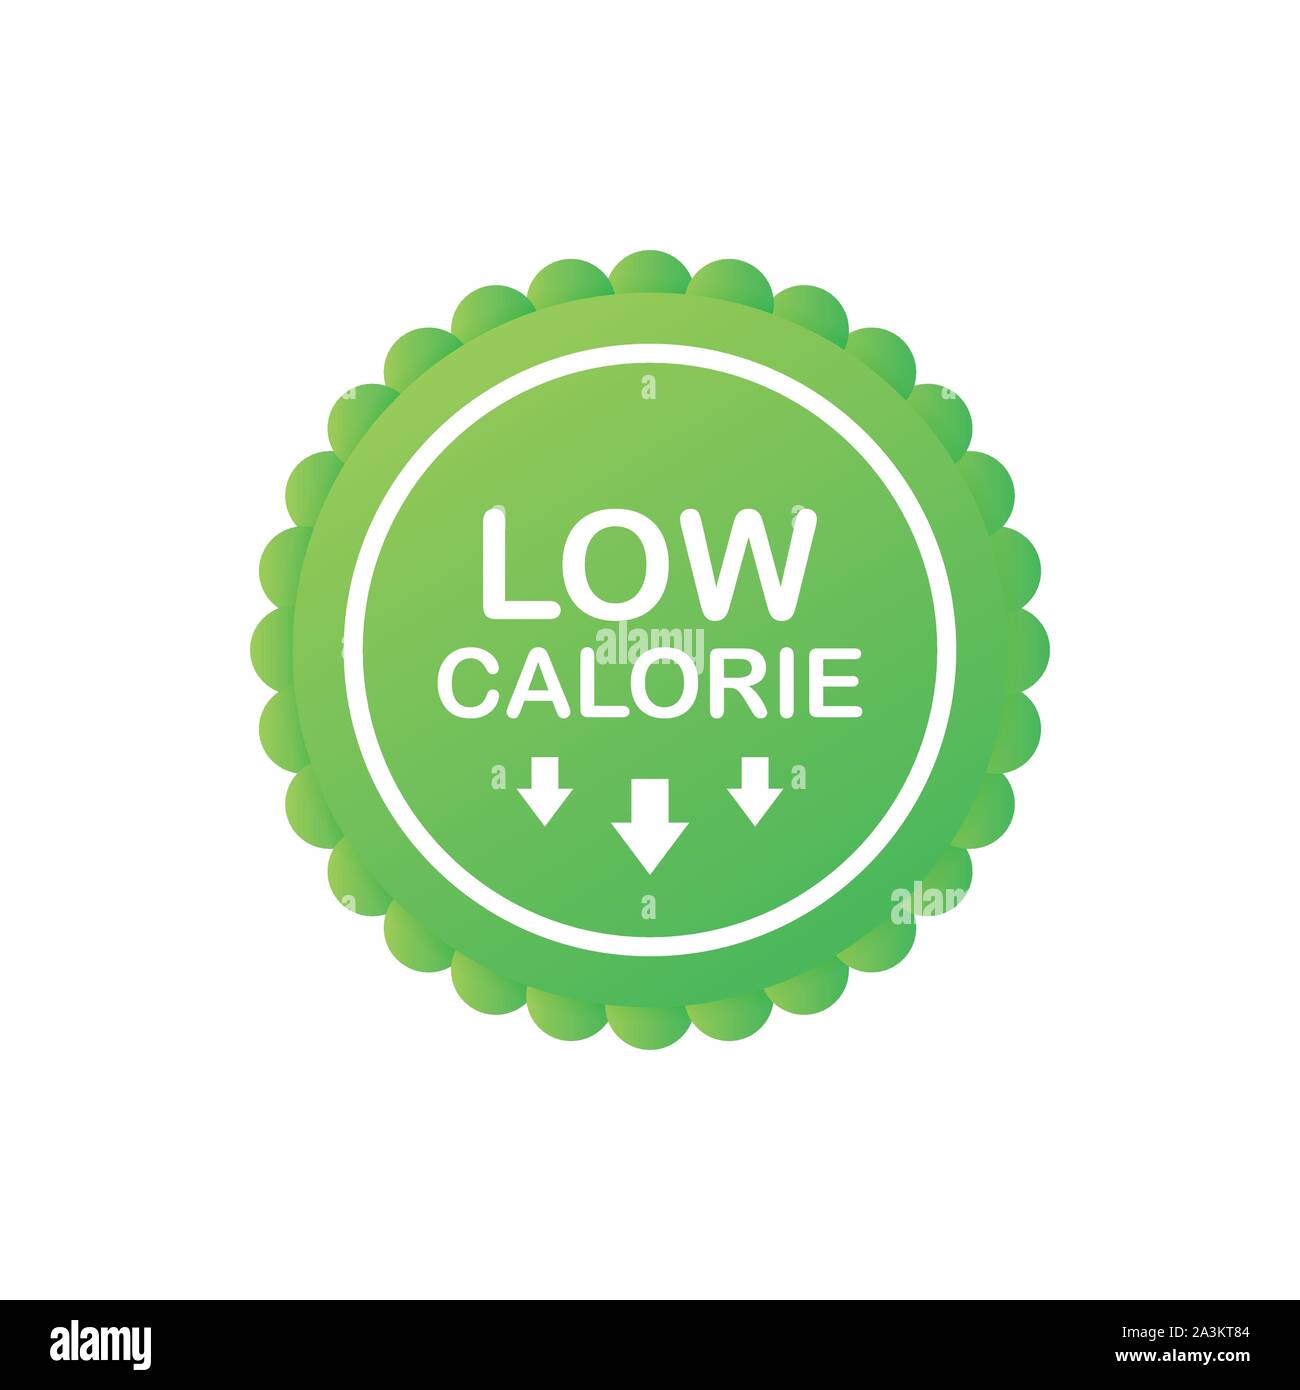 Low calorie label or sticker on white background. Vector stock illustration. Stock Vector